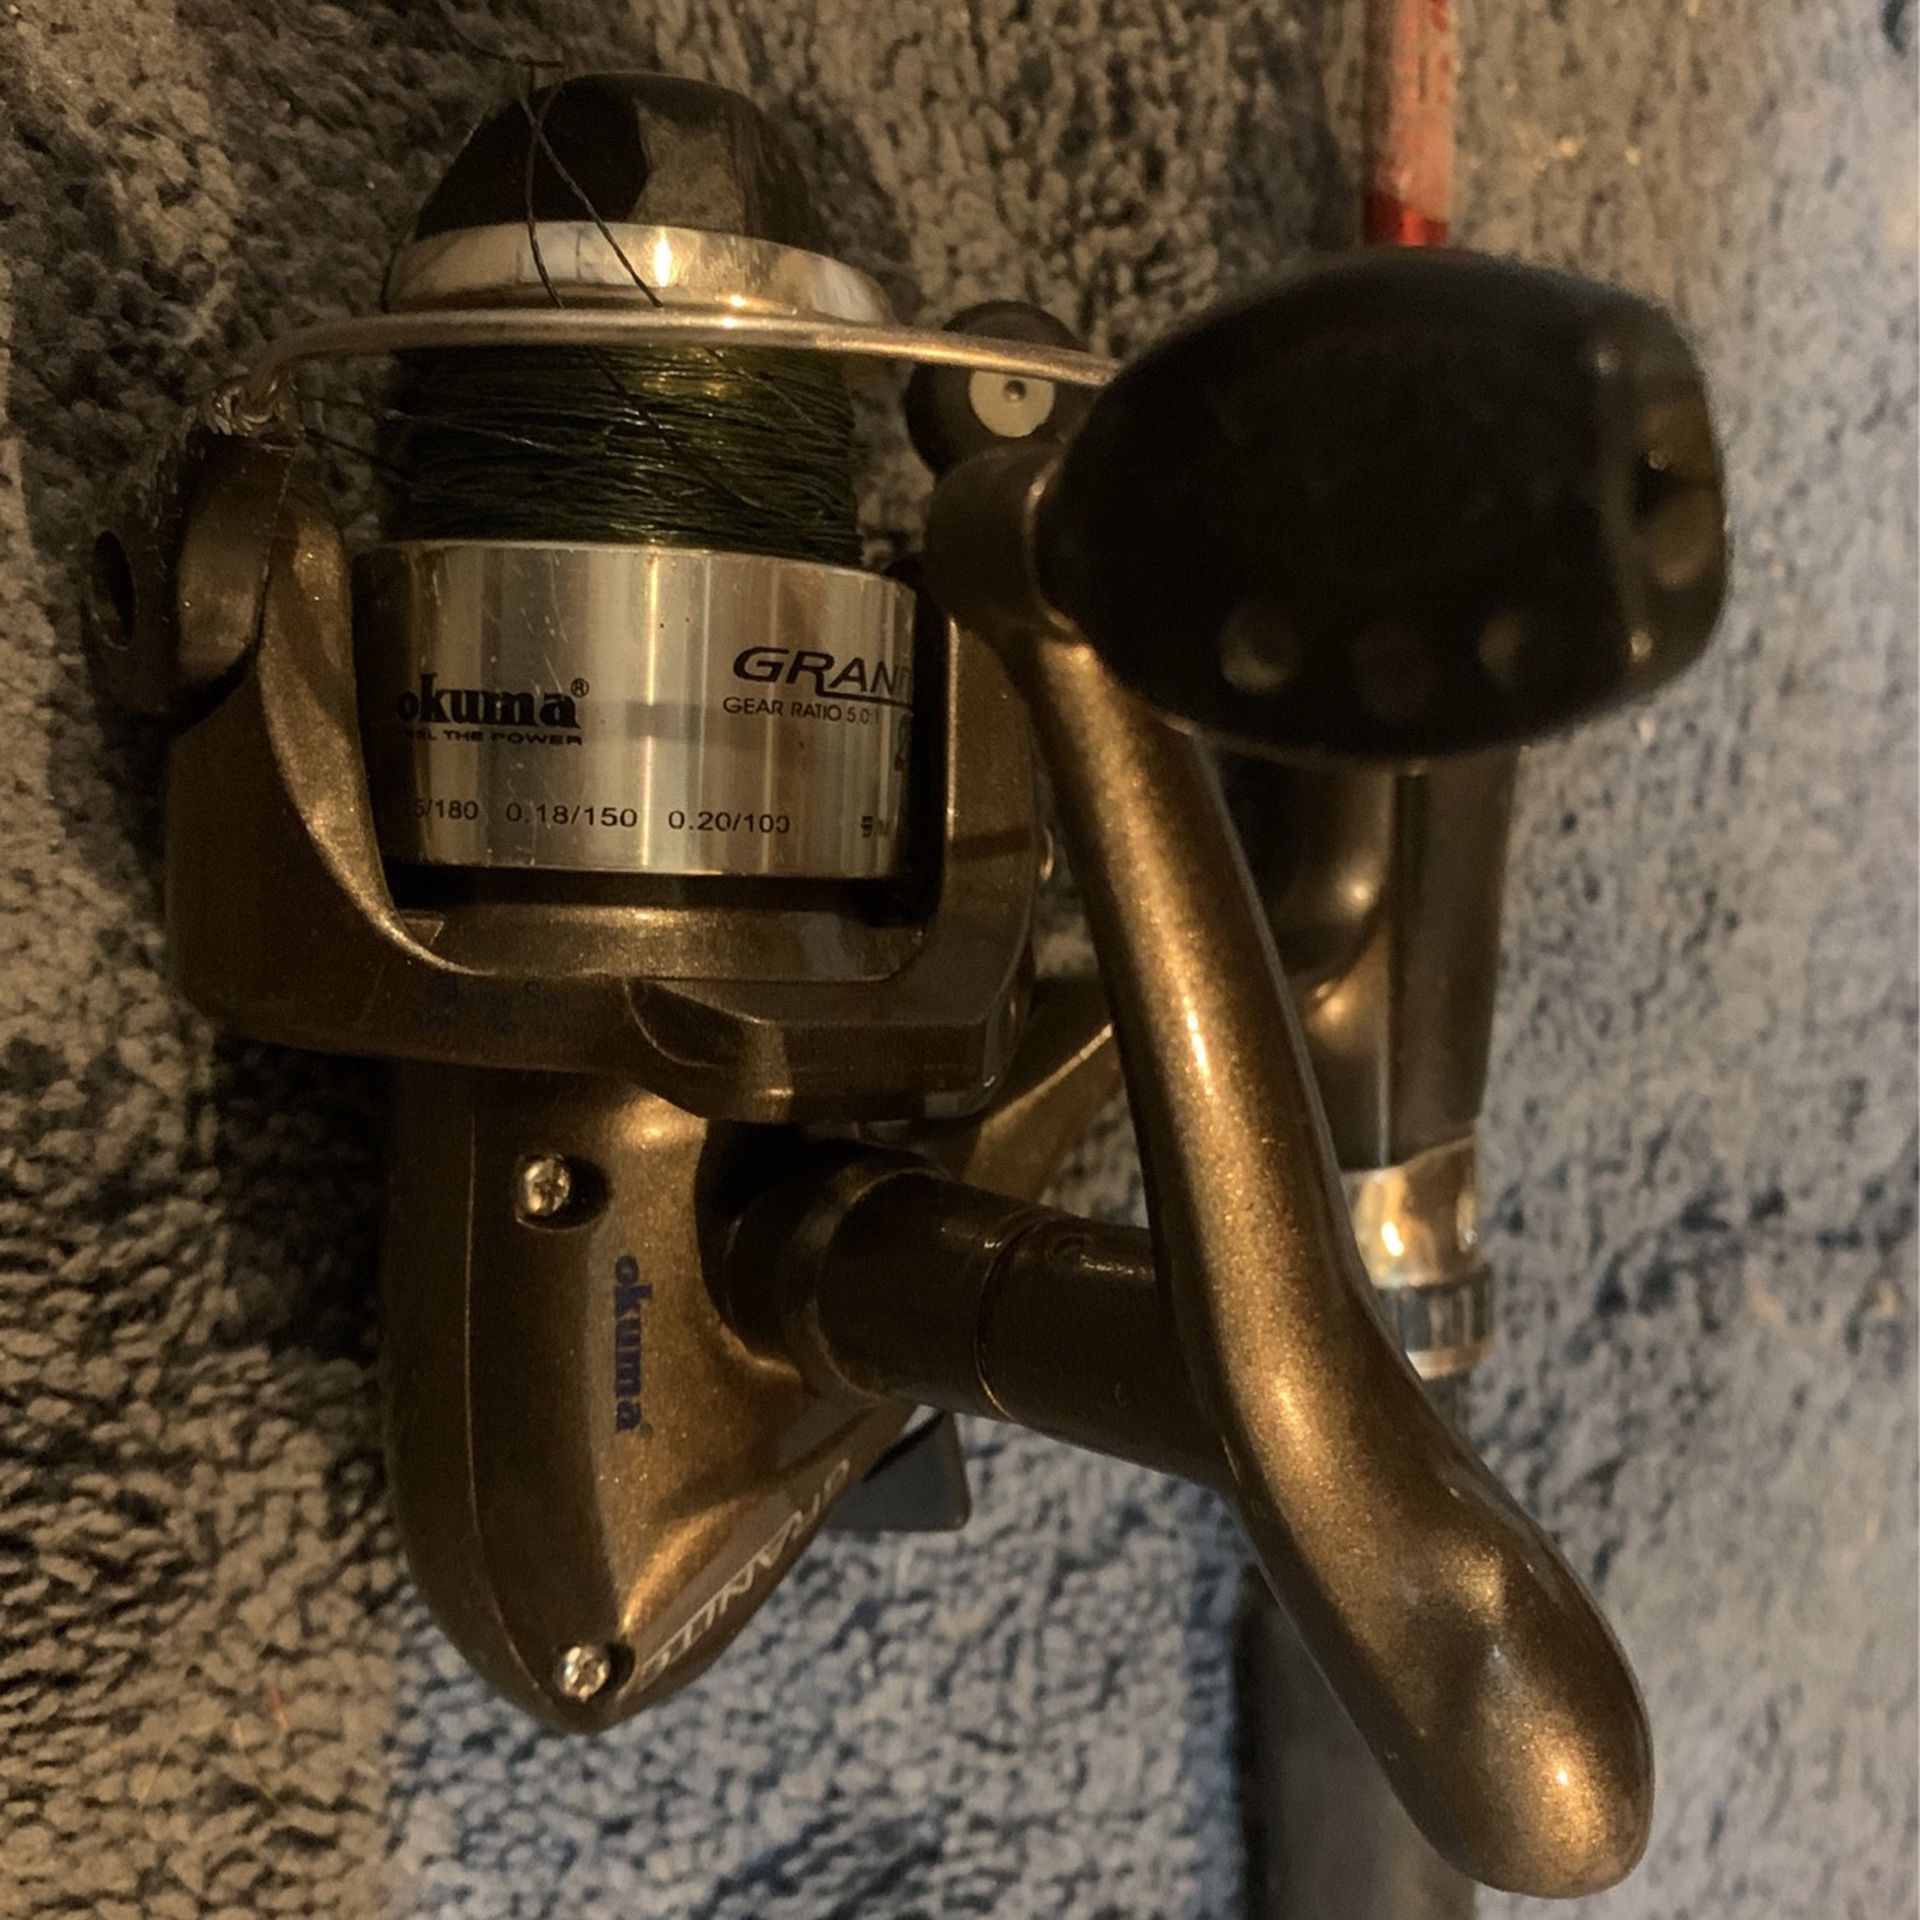 Okuma Reel And About 5 And Half Foot Tall